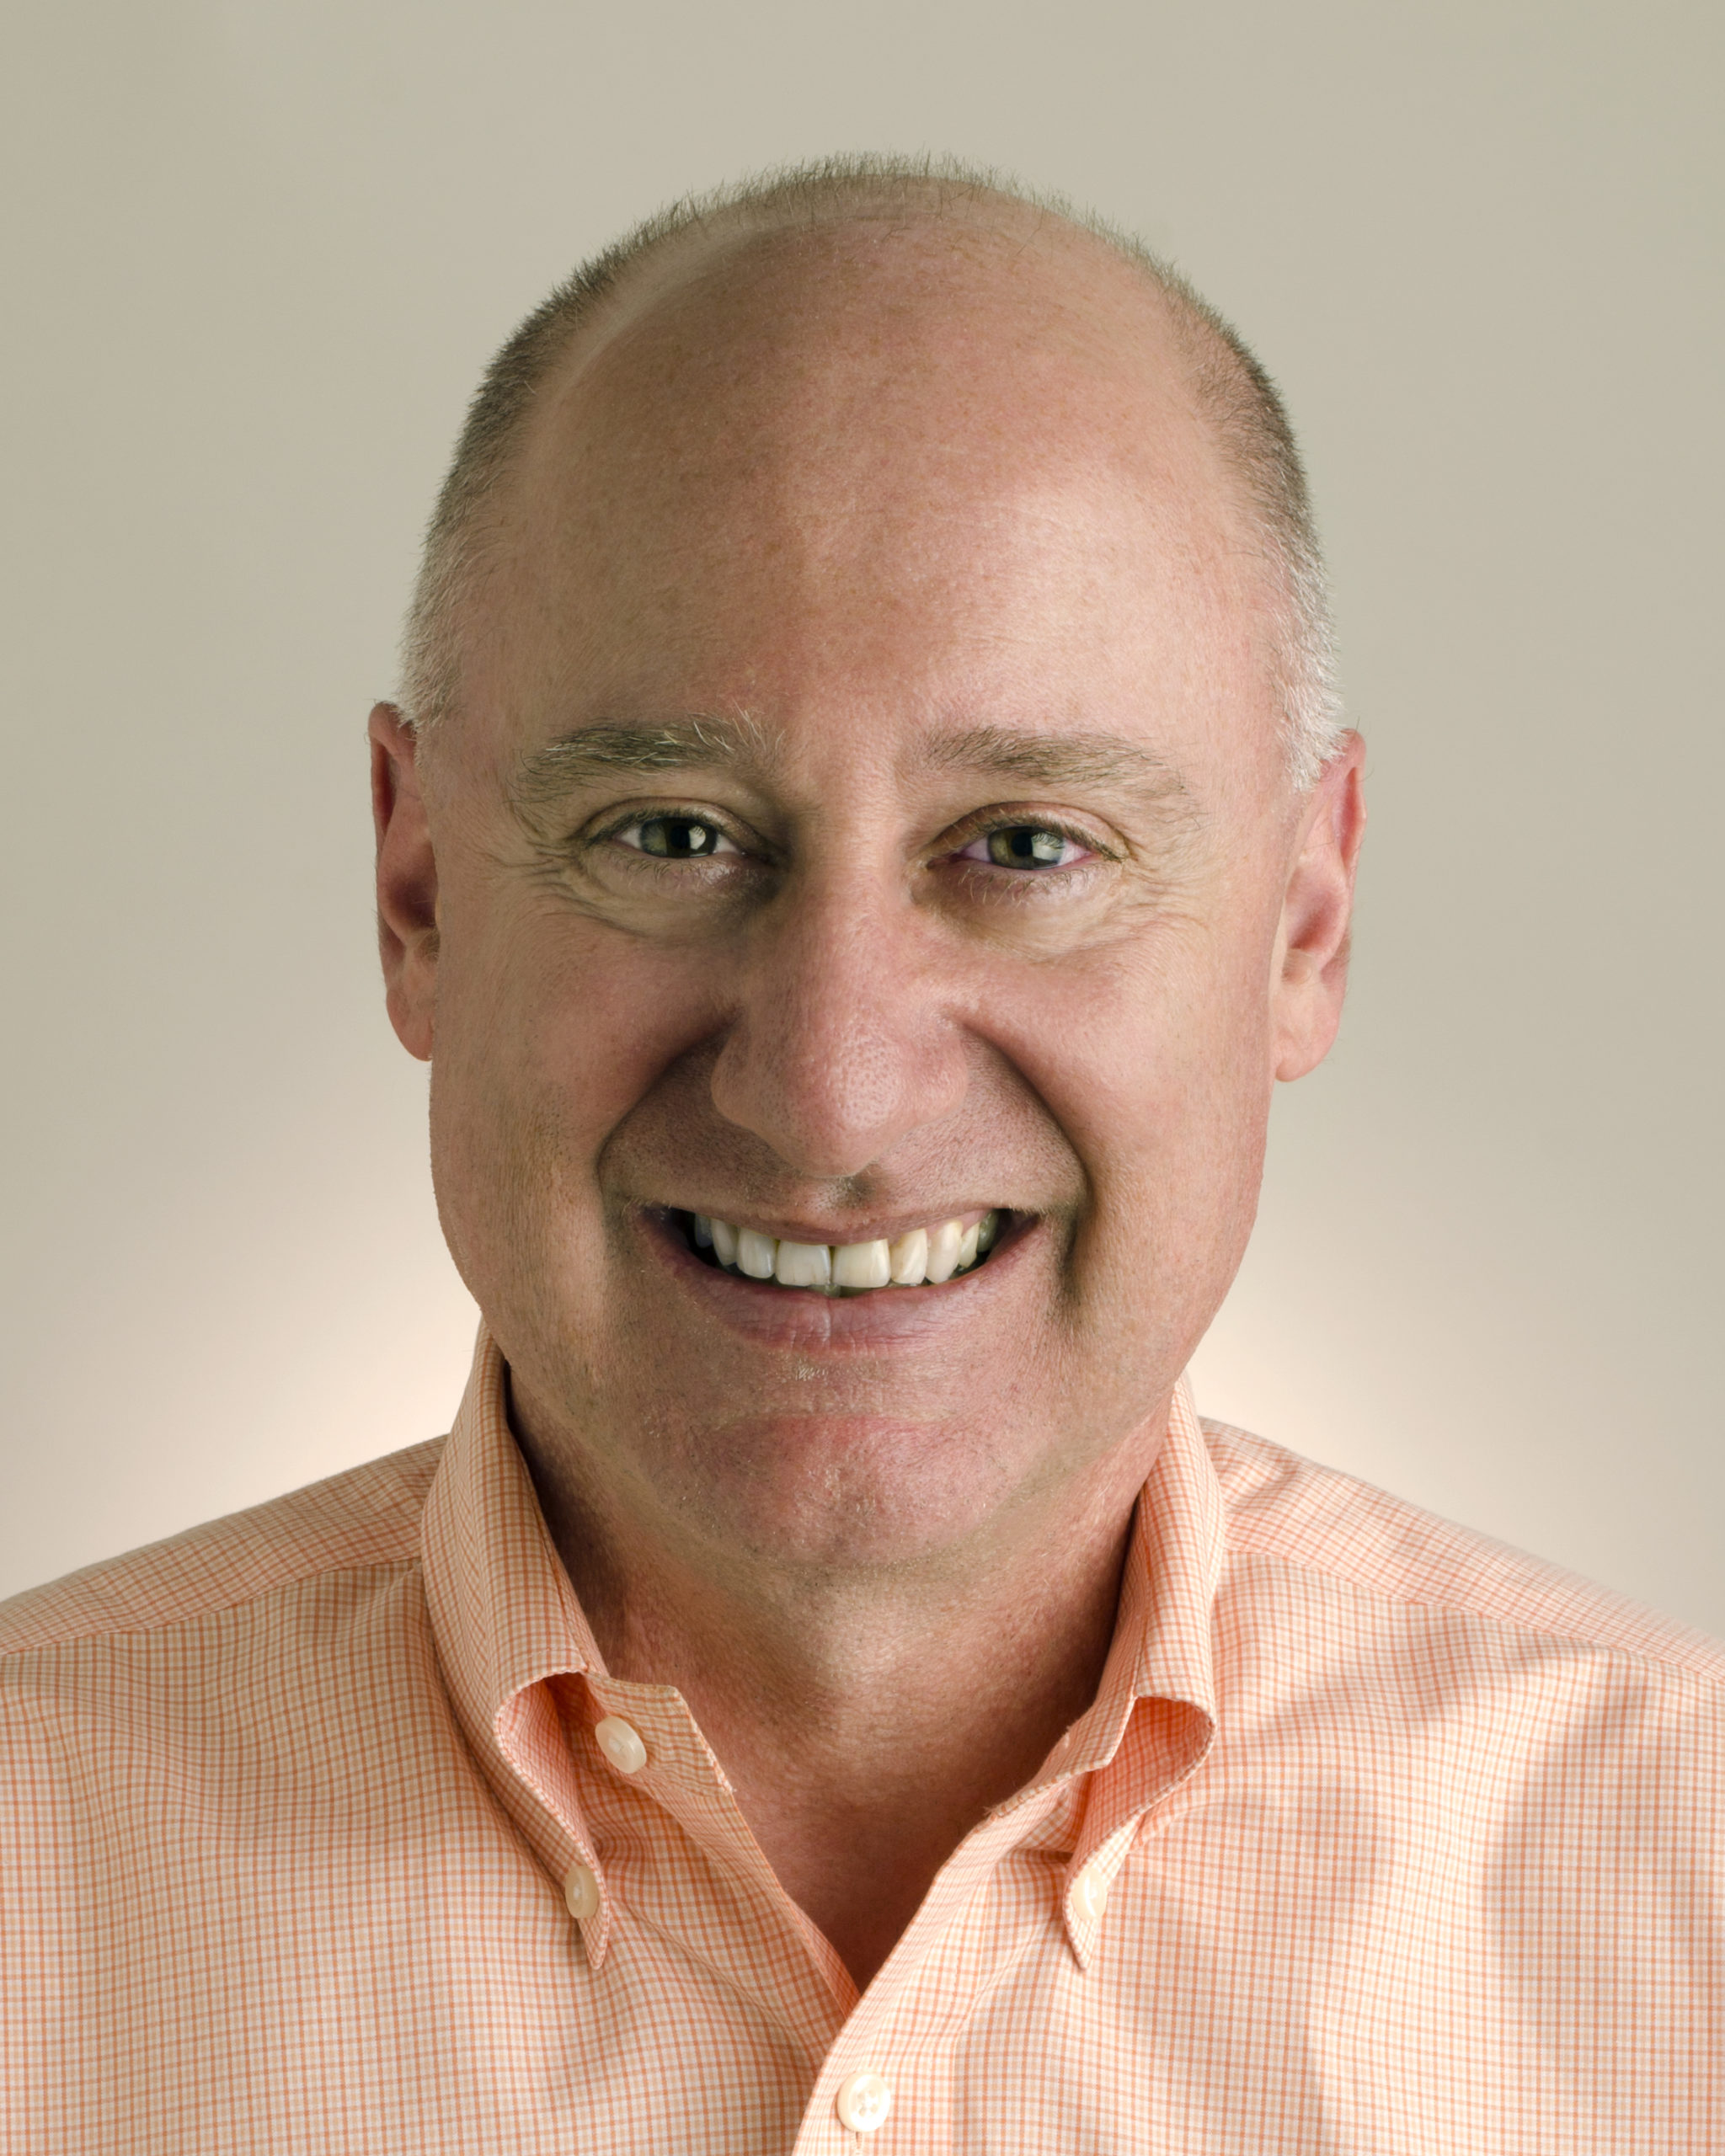 A photograph of Ted Lempert in an organge shirt against a beige background.